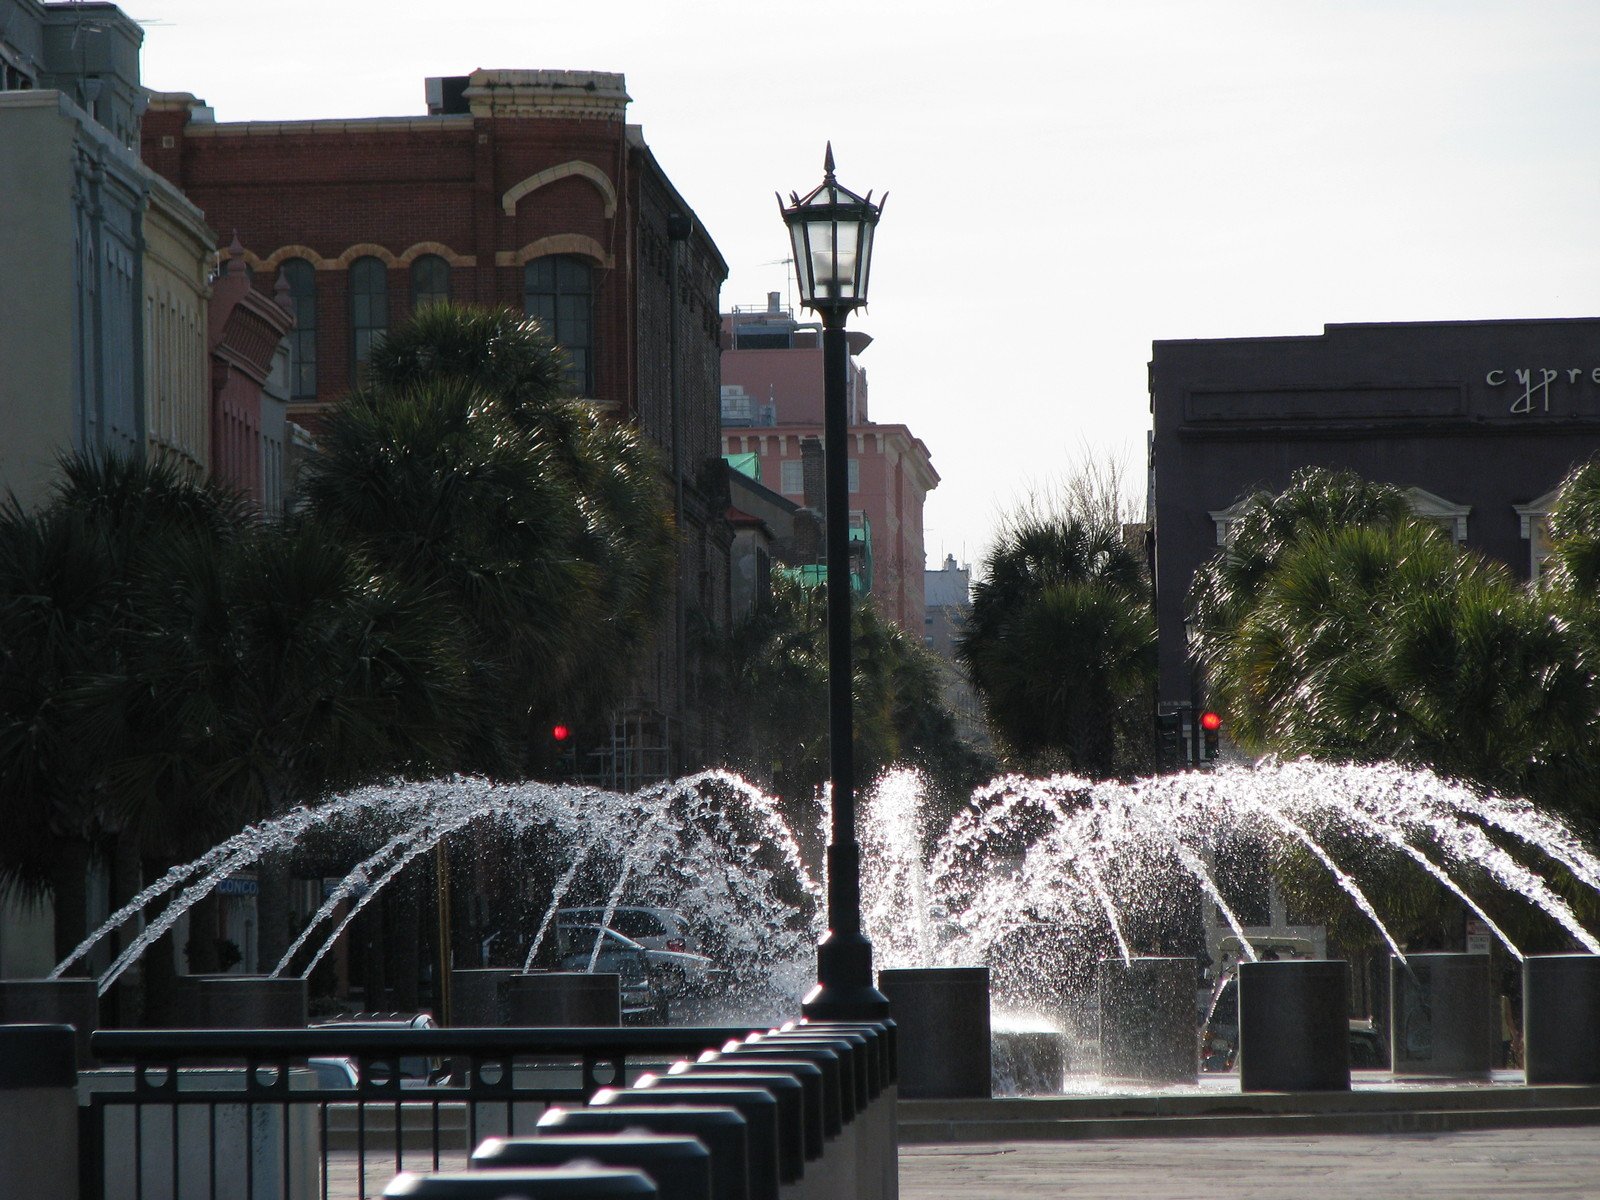 a row of water fountains spewing up in the city